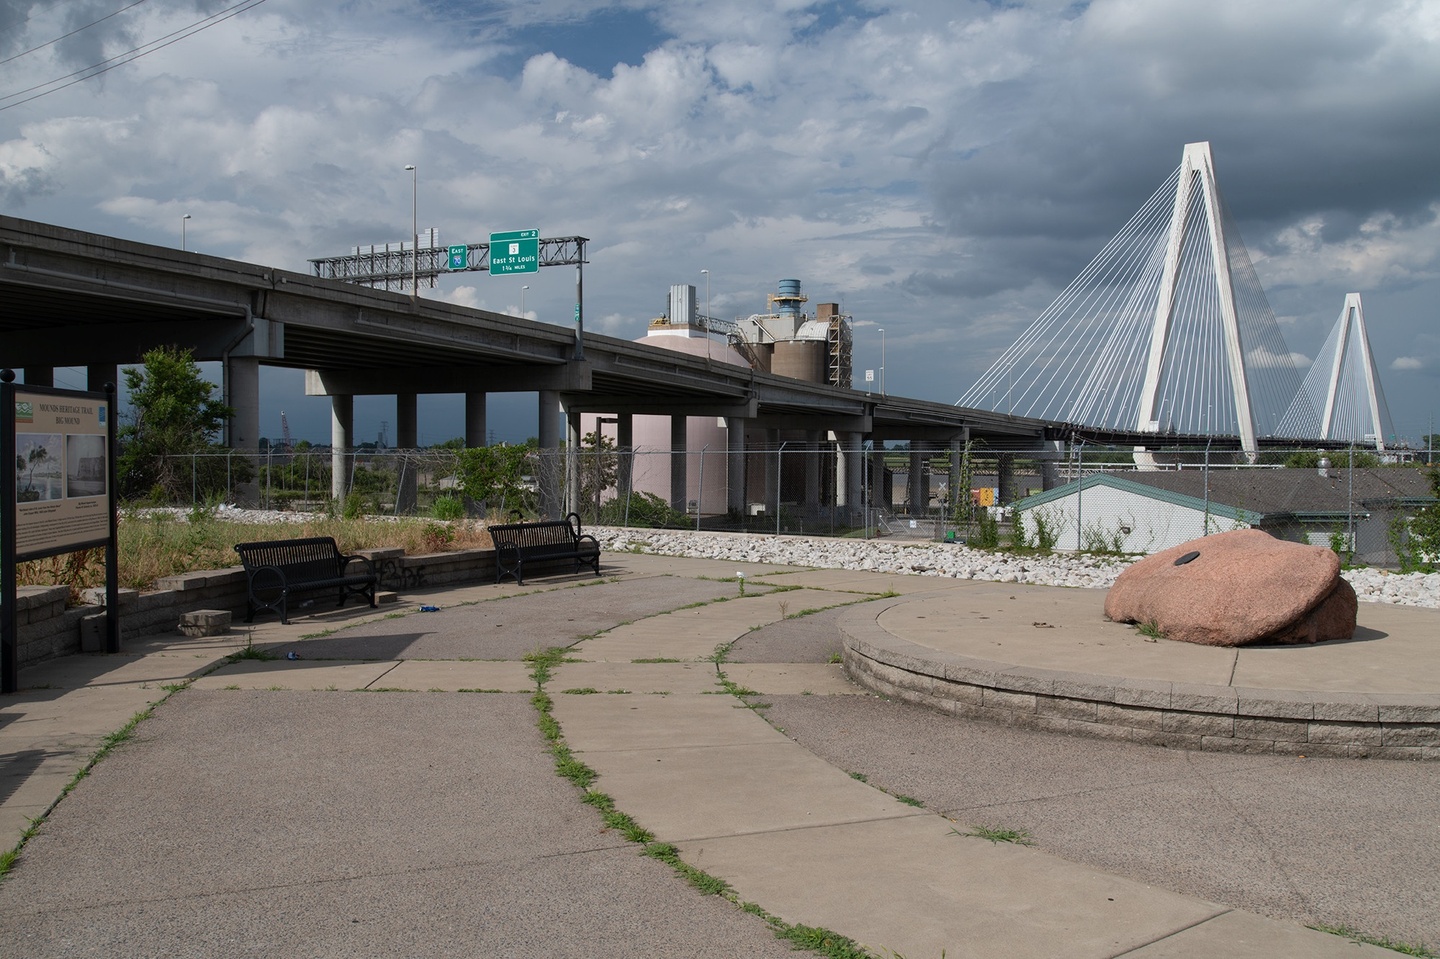 Outdoor photo in the St. Louis area, looking at an overpass to the Stan Musial Veterans Memorial Bridge